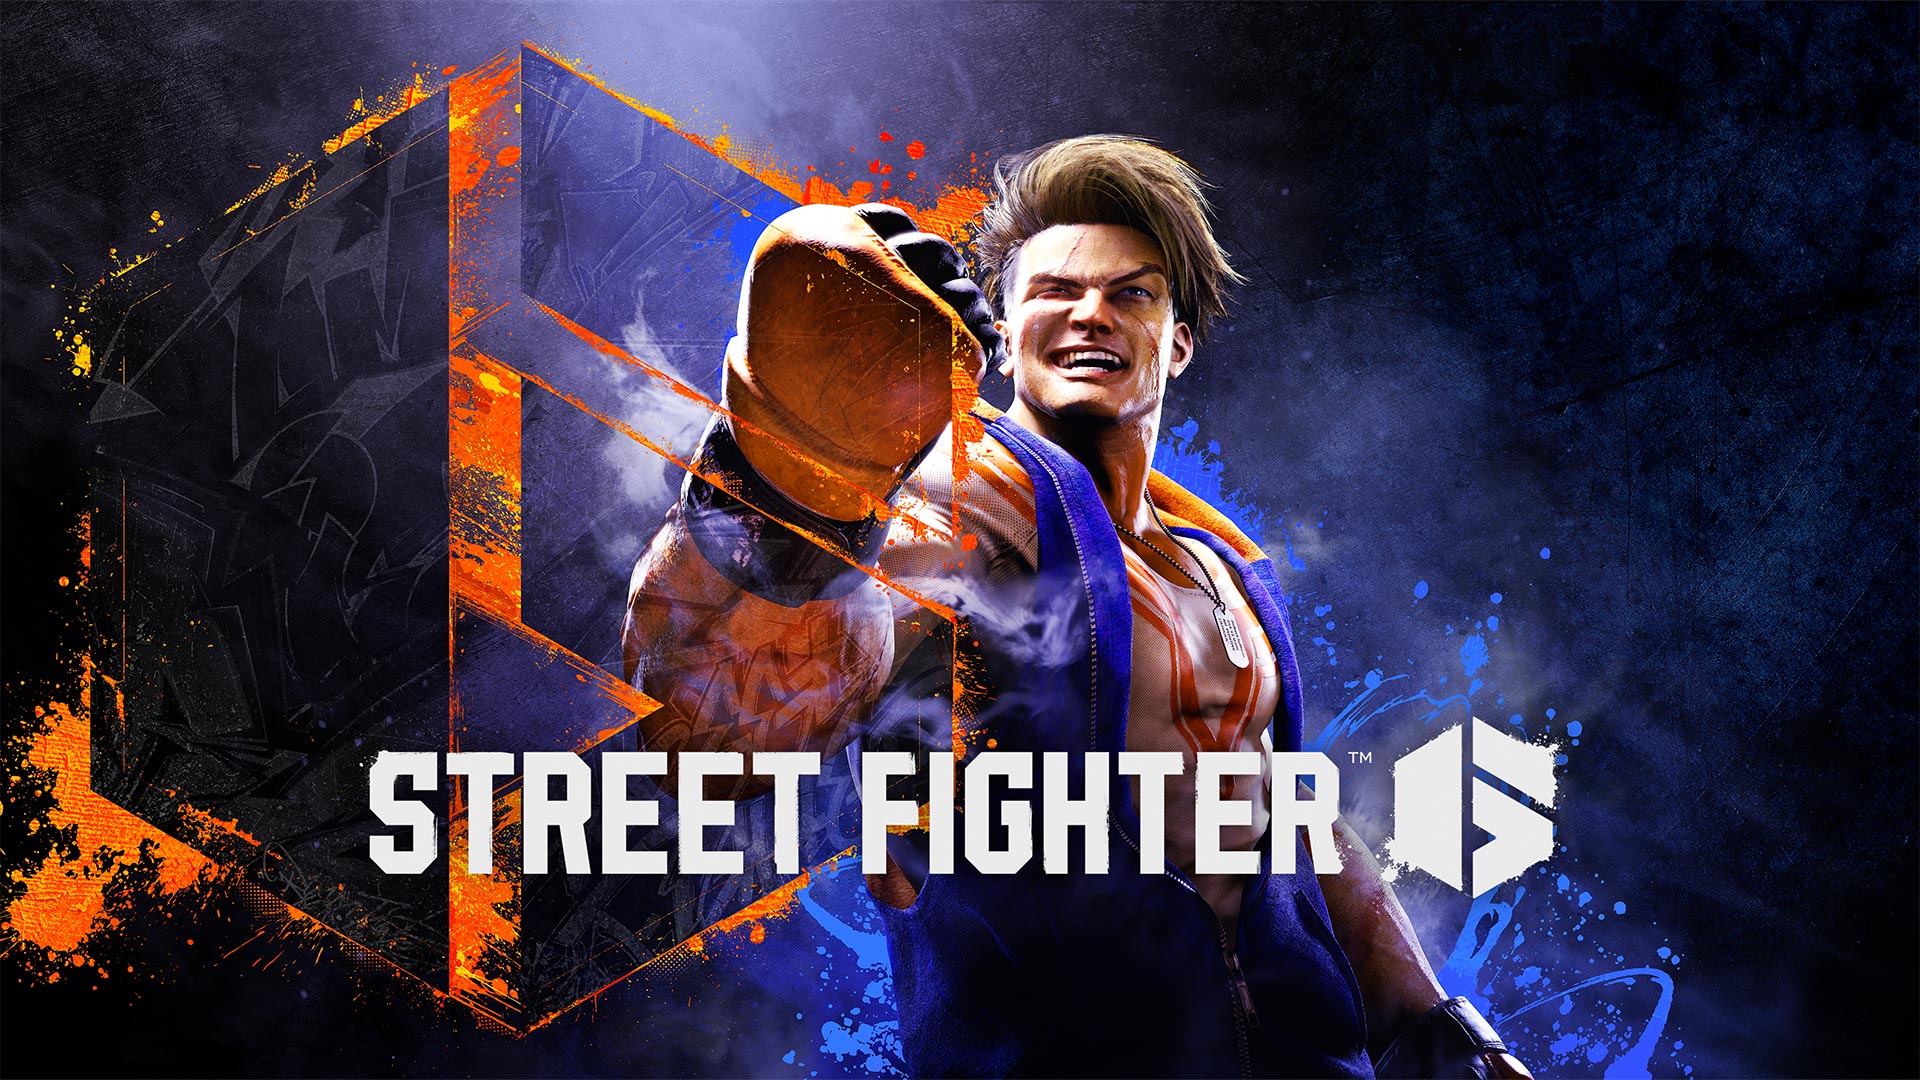 Street Fighter live-action movie confirmed